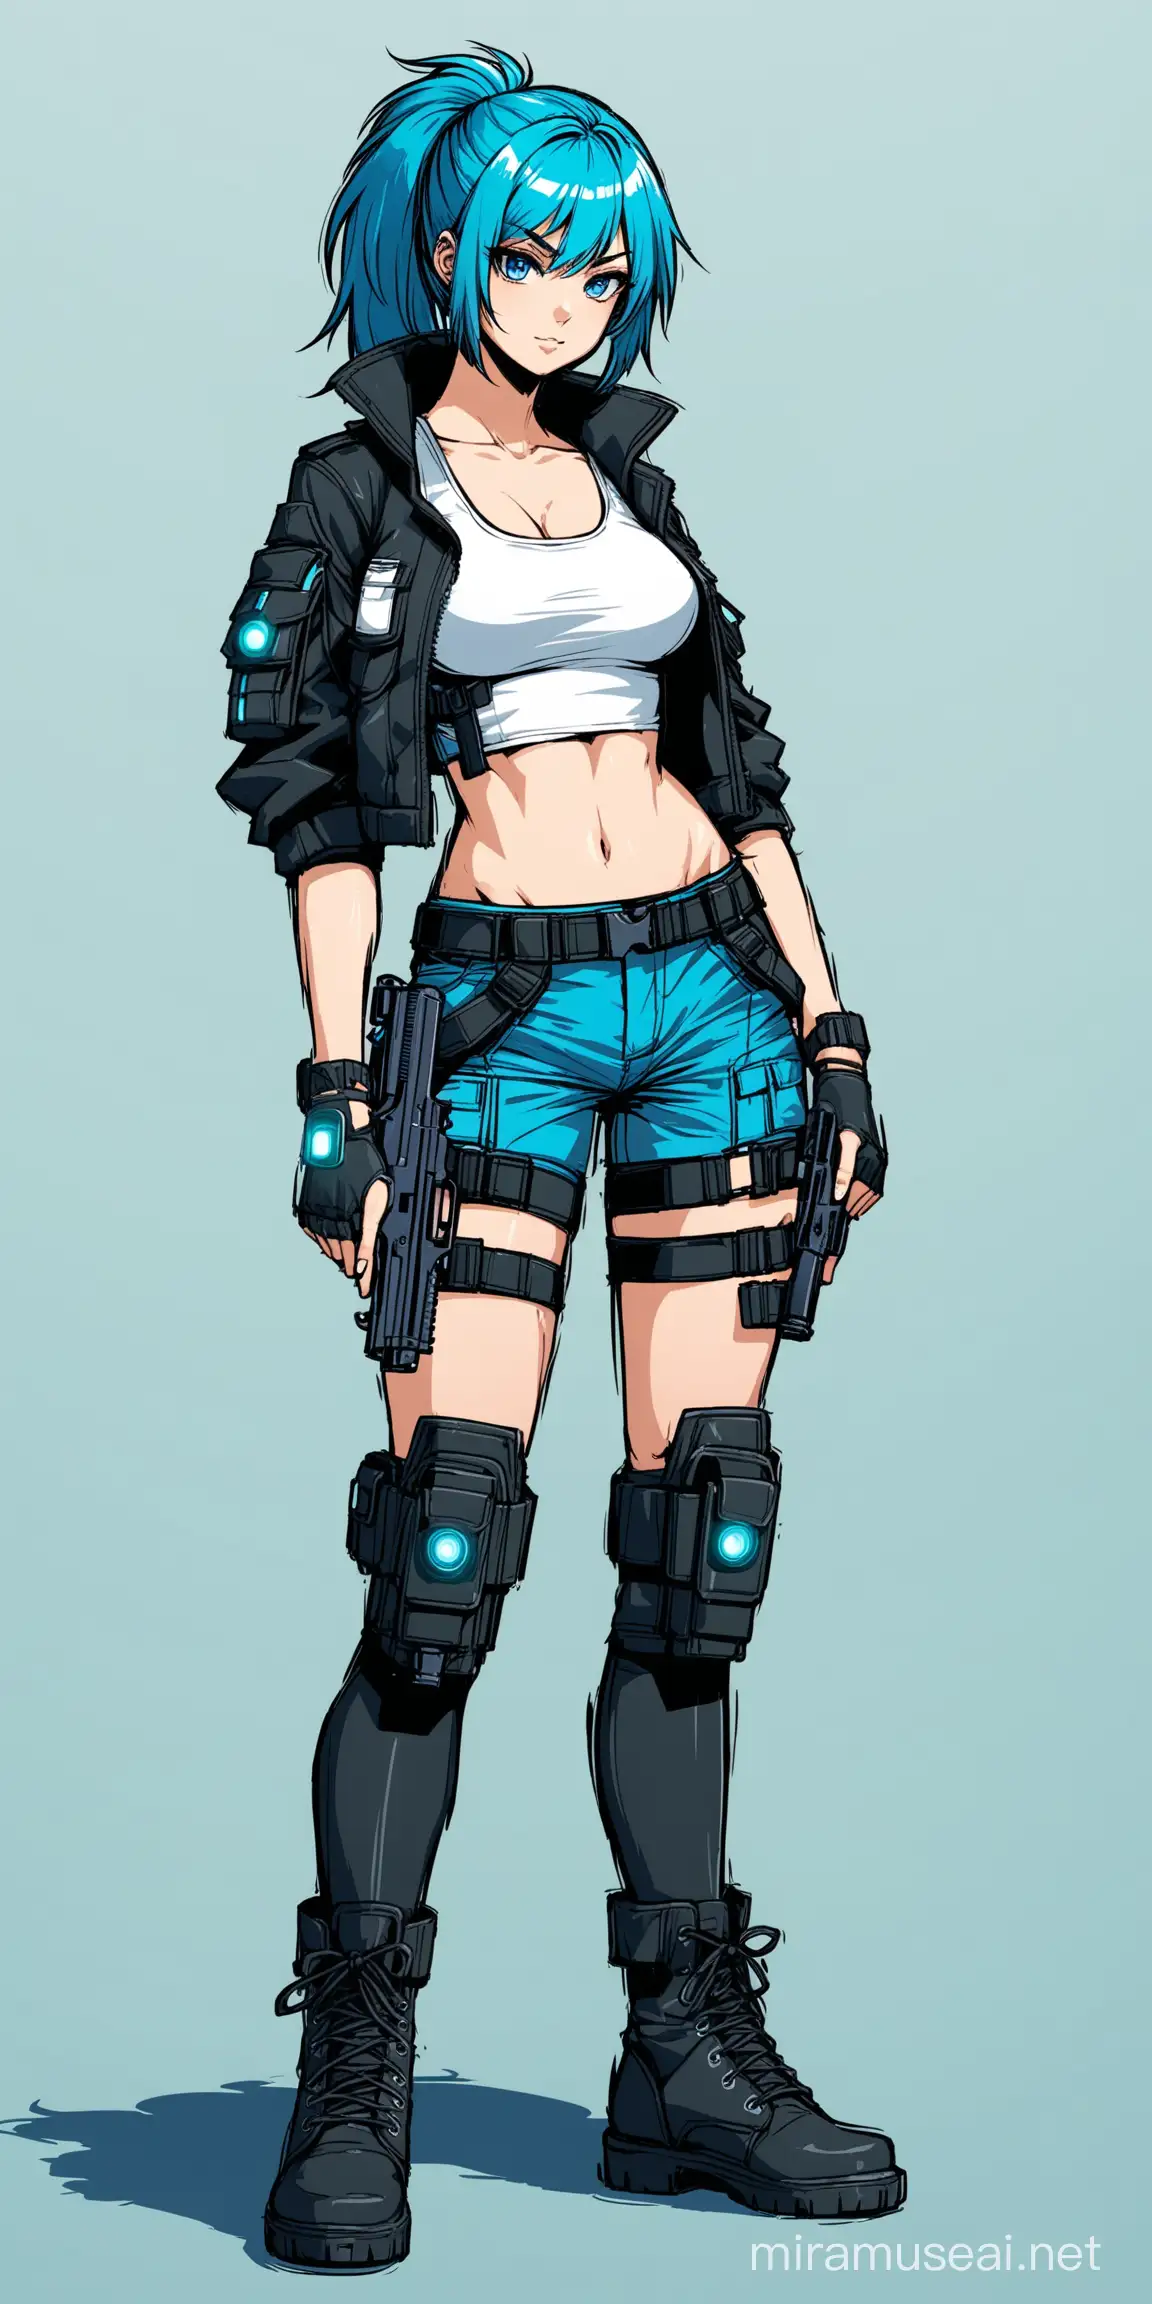 sexy fit 24 year old hero girl, shaggy blue hair in ponytail, blue eyes, posing with handguns, toned body, short white tank top, sexy midriff, wearing cyberpunk jacket, and cargo shorts, holsters on each thigh, combat boots, blue black white 3 color minimal design